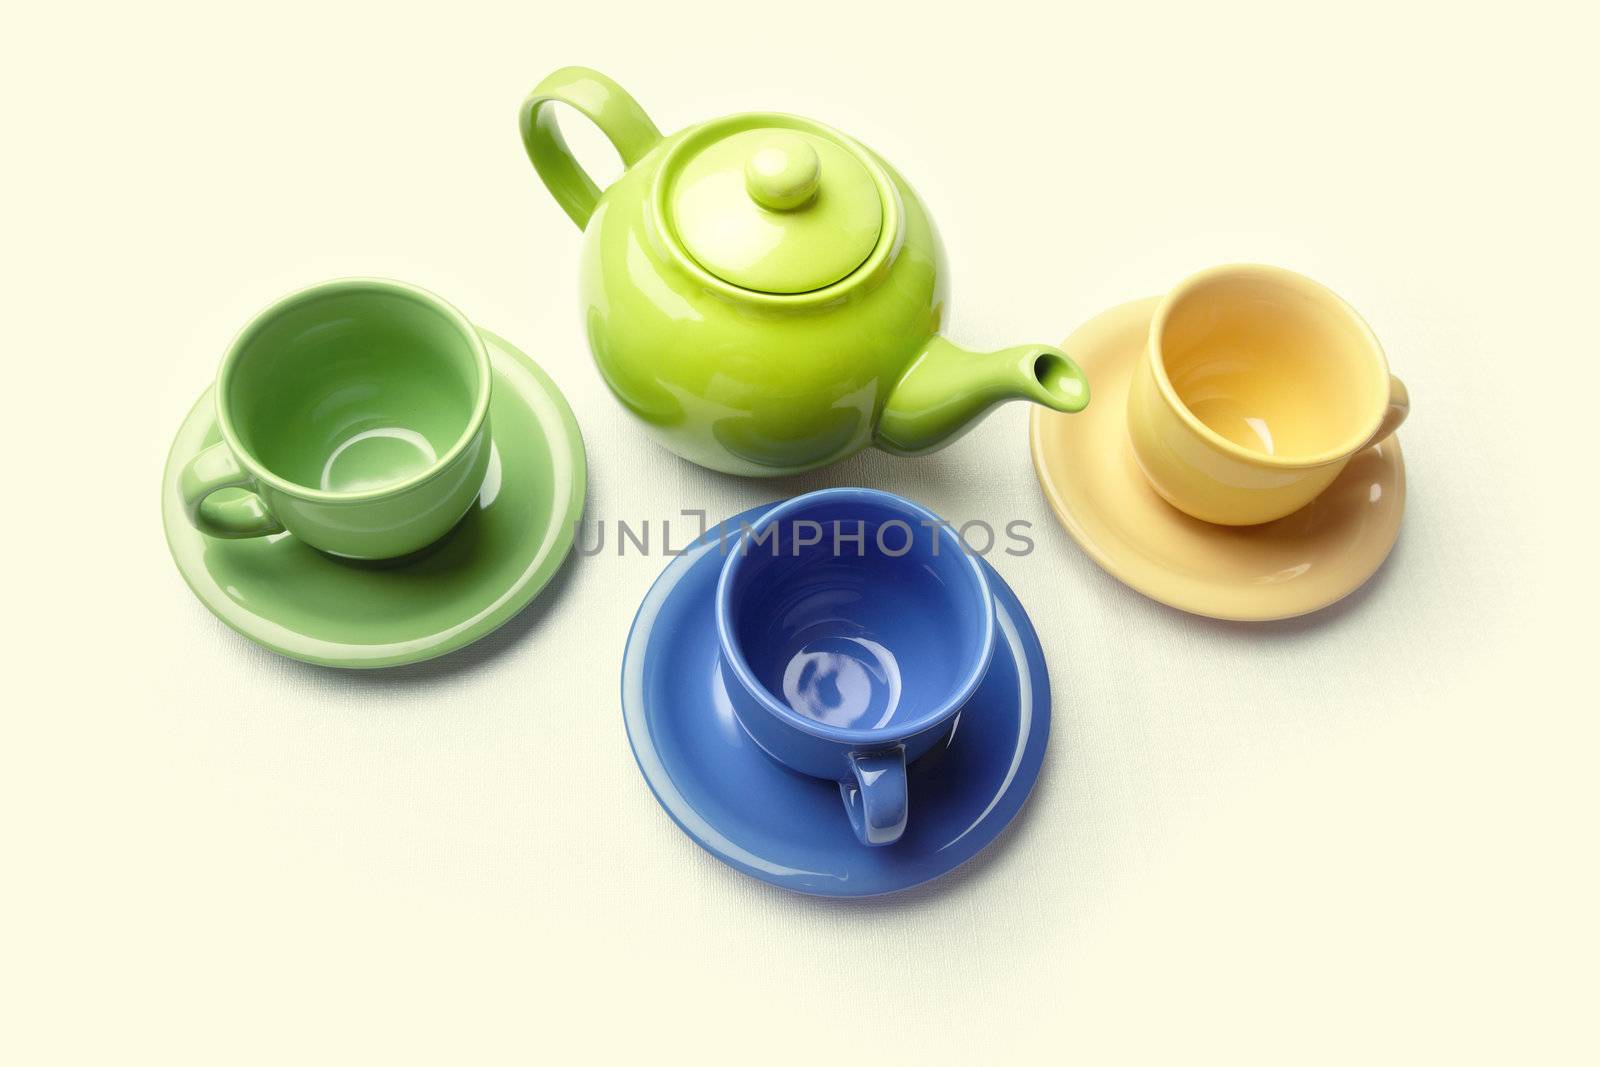 One teapot and three teacups on a textured background